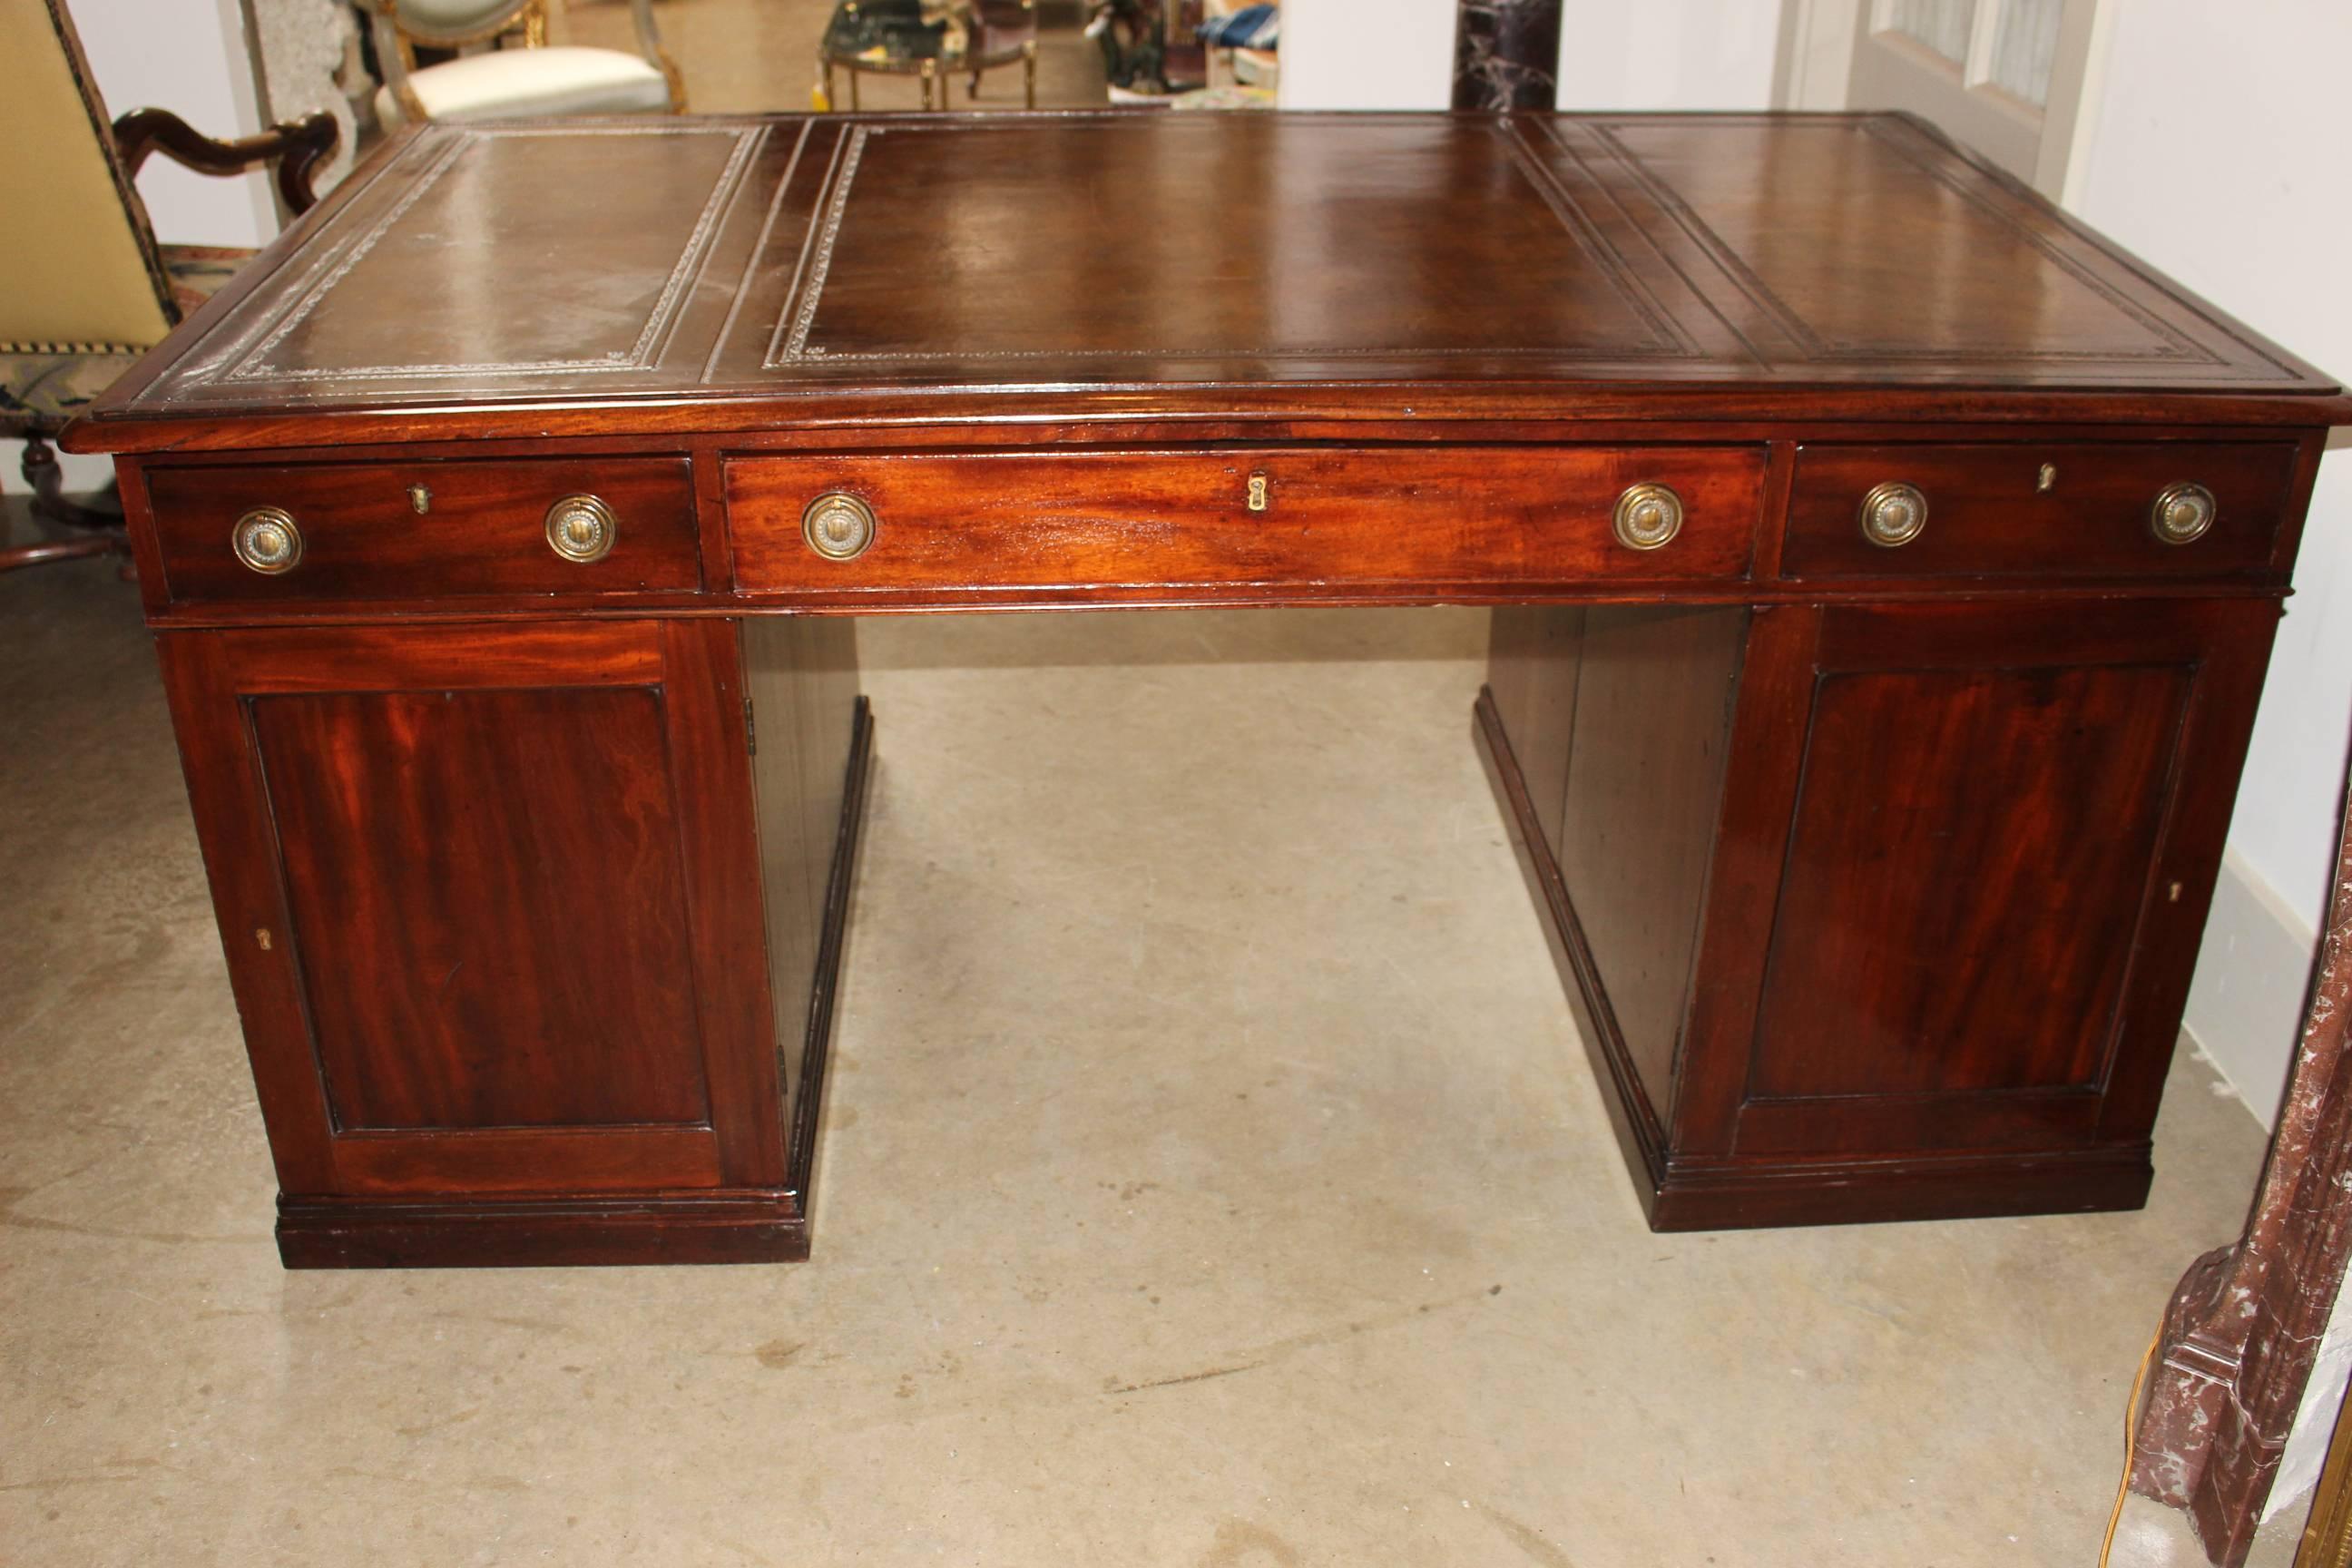 An English Regency mahogany partner's desk with leather top and brass pulls.